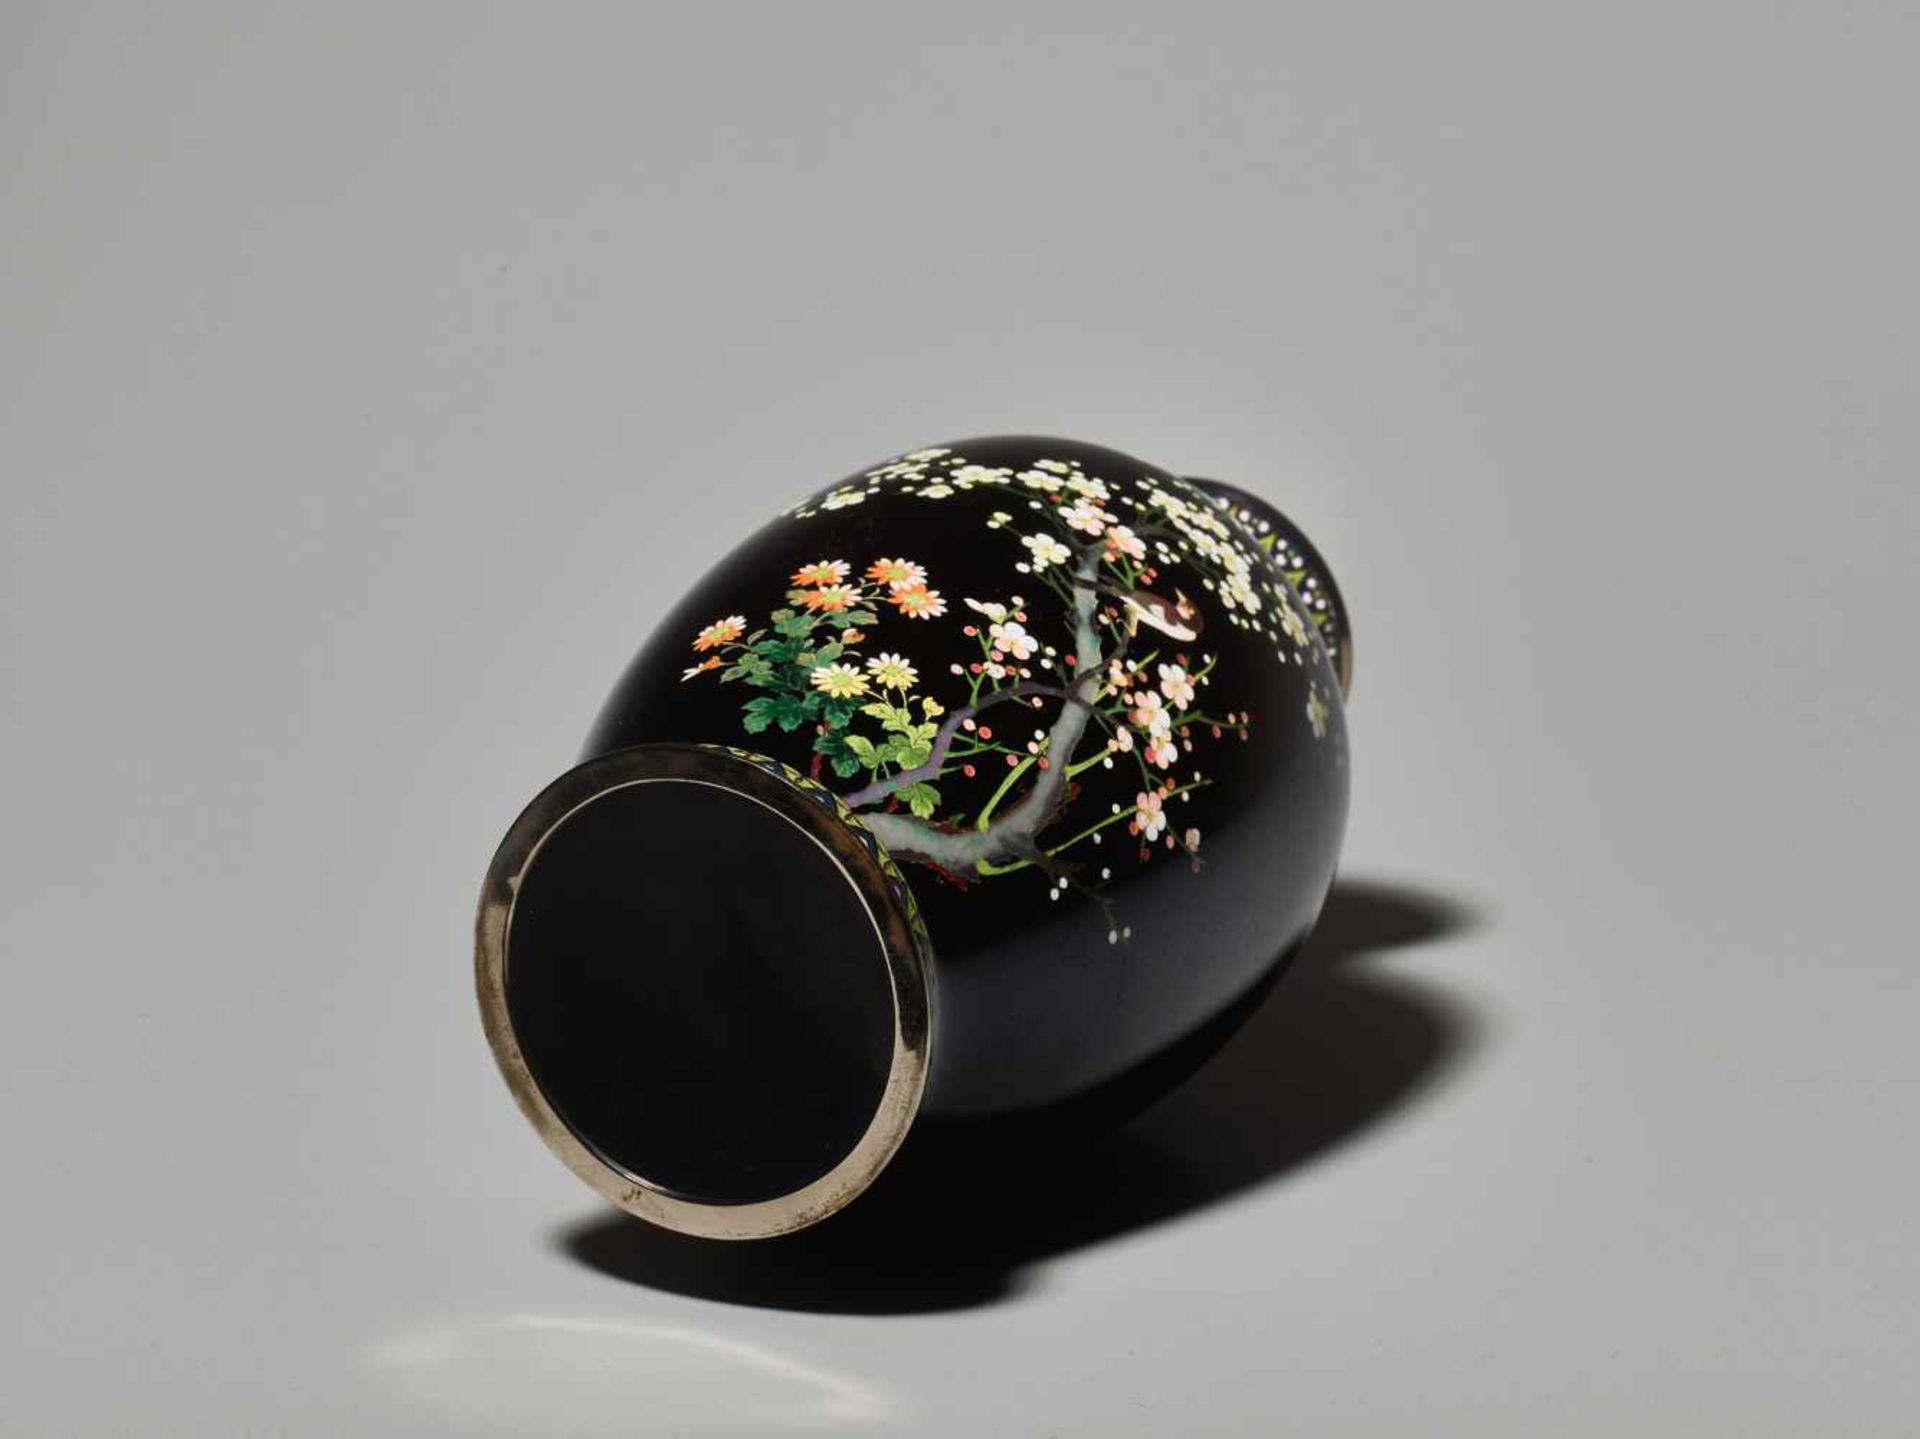 A LARGE JAPANESE CLOISONNÉ ENAMEL VASE WITH CHERRY BLOSSOMS AND SPARROWS Cloisonné with colored - Image 3 of 6